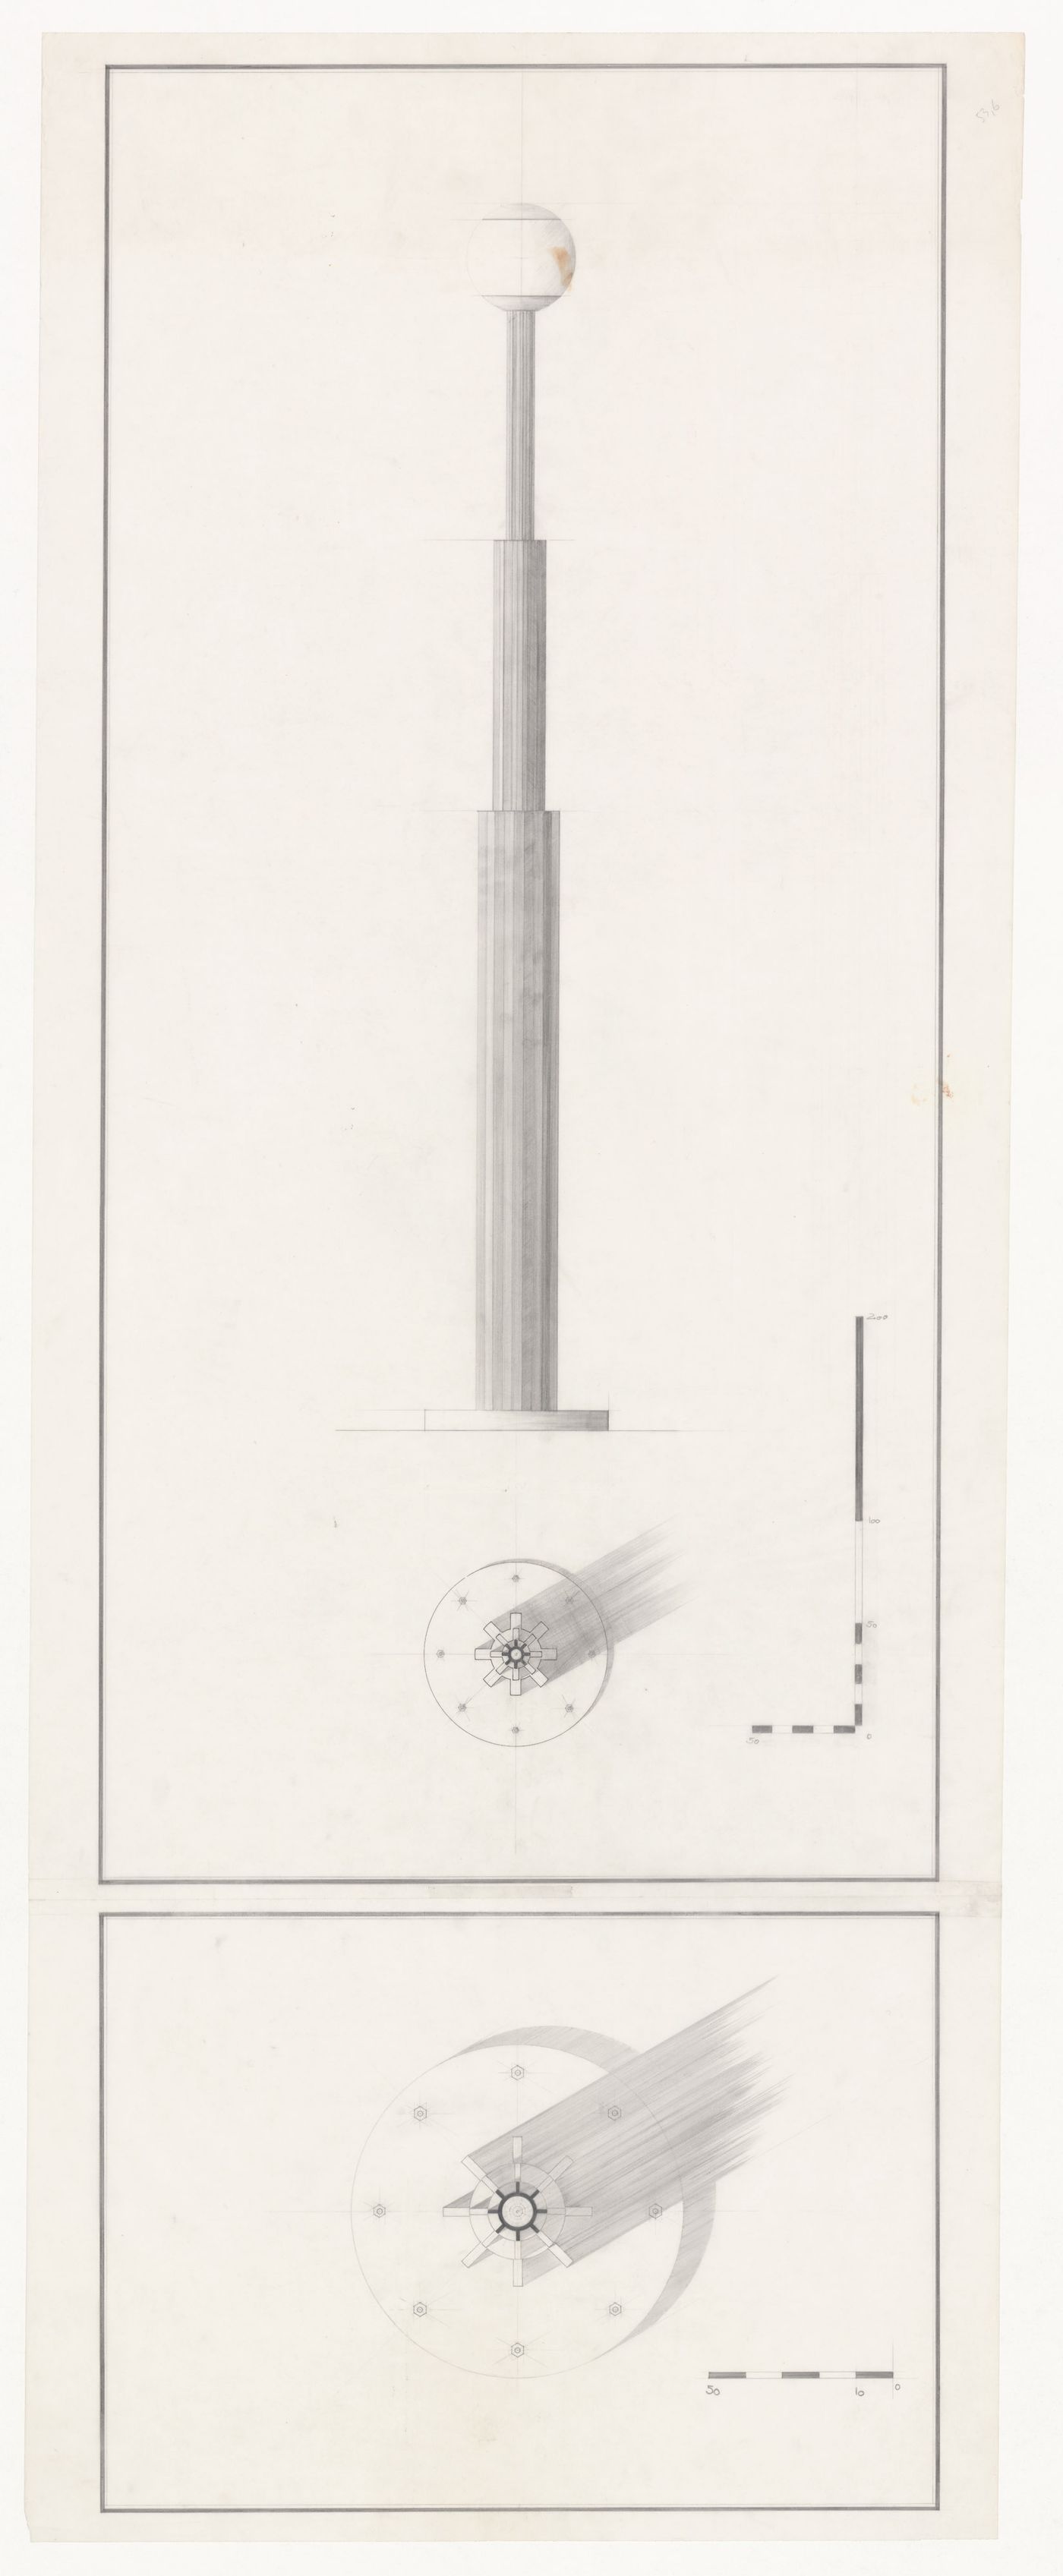 Elevation and plans for Lampada Alessi